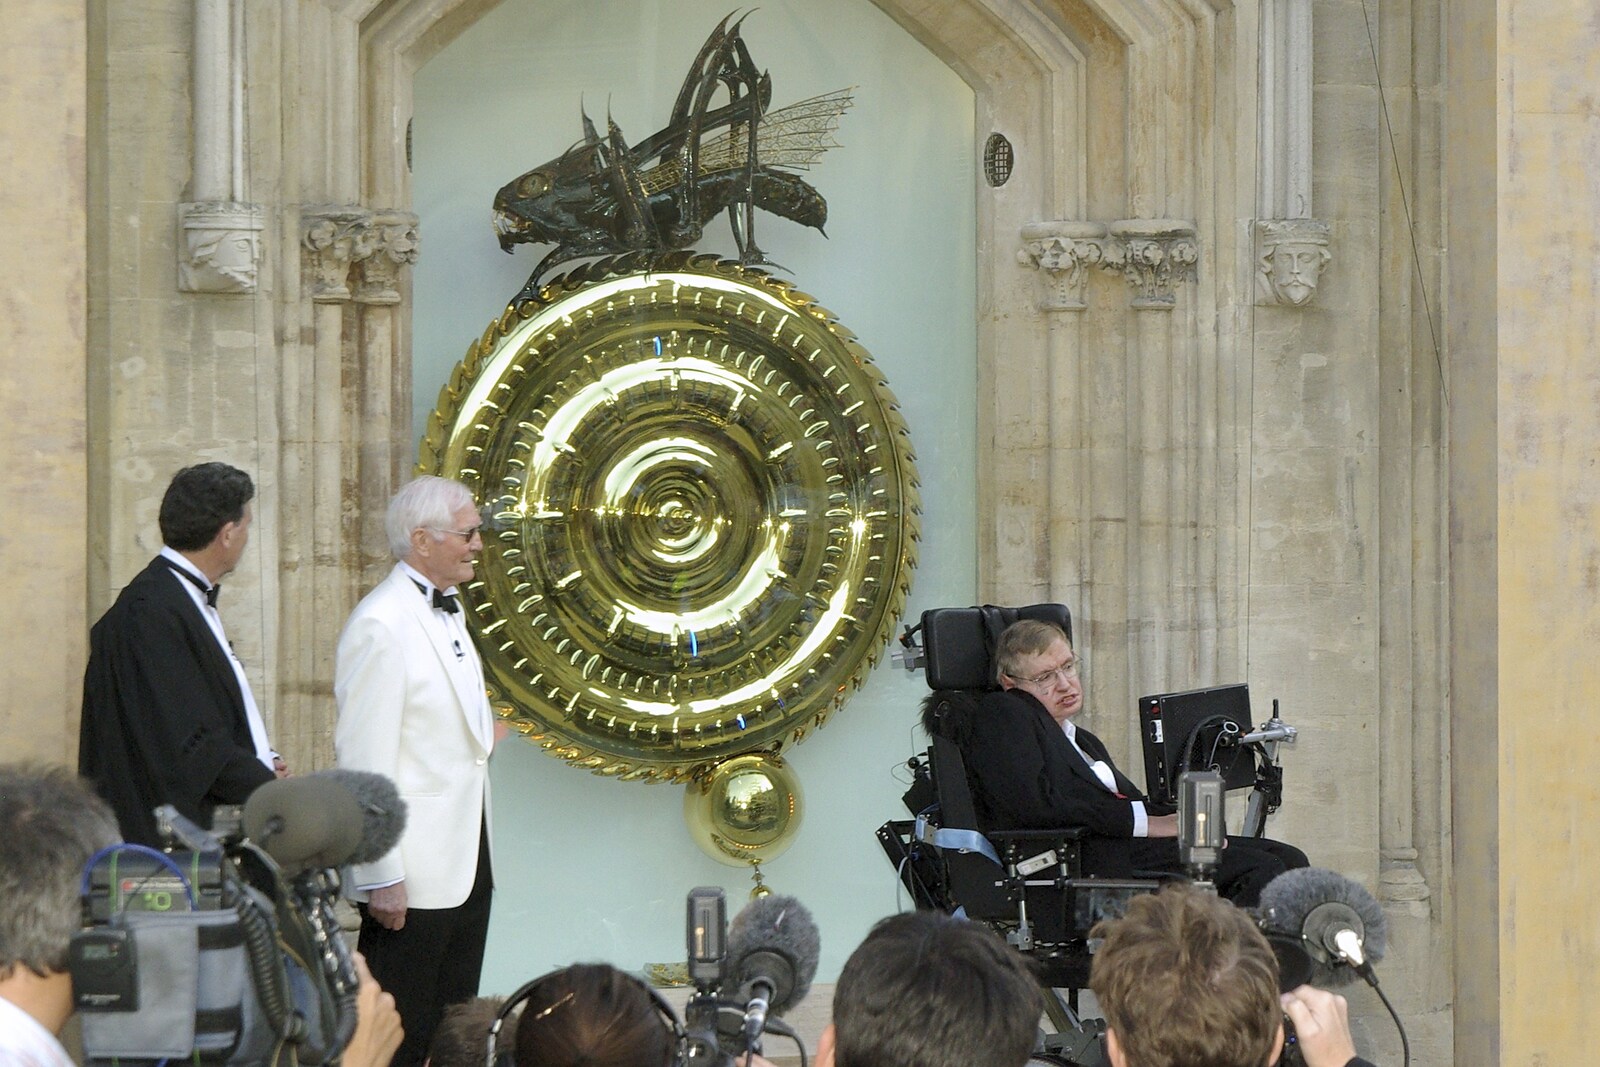 A Brief Time in History: Stephen Hawking and the Corpus Christi Clock, Benet Street, Cambridge - 19th September 2008: The 'Chronophage' clock is unveiled